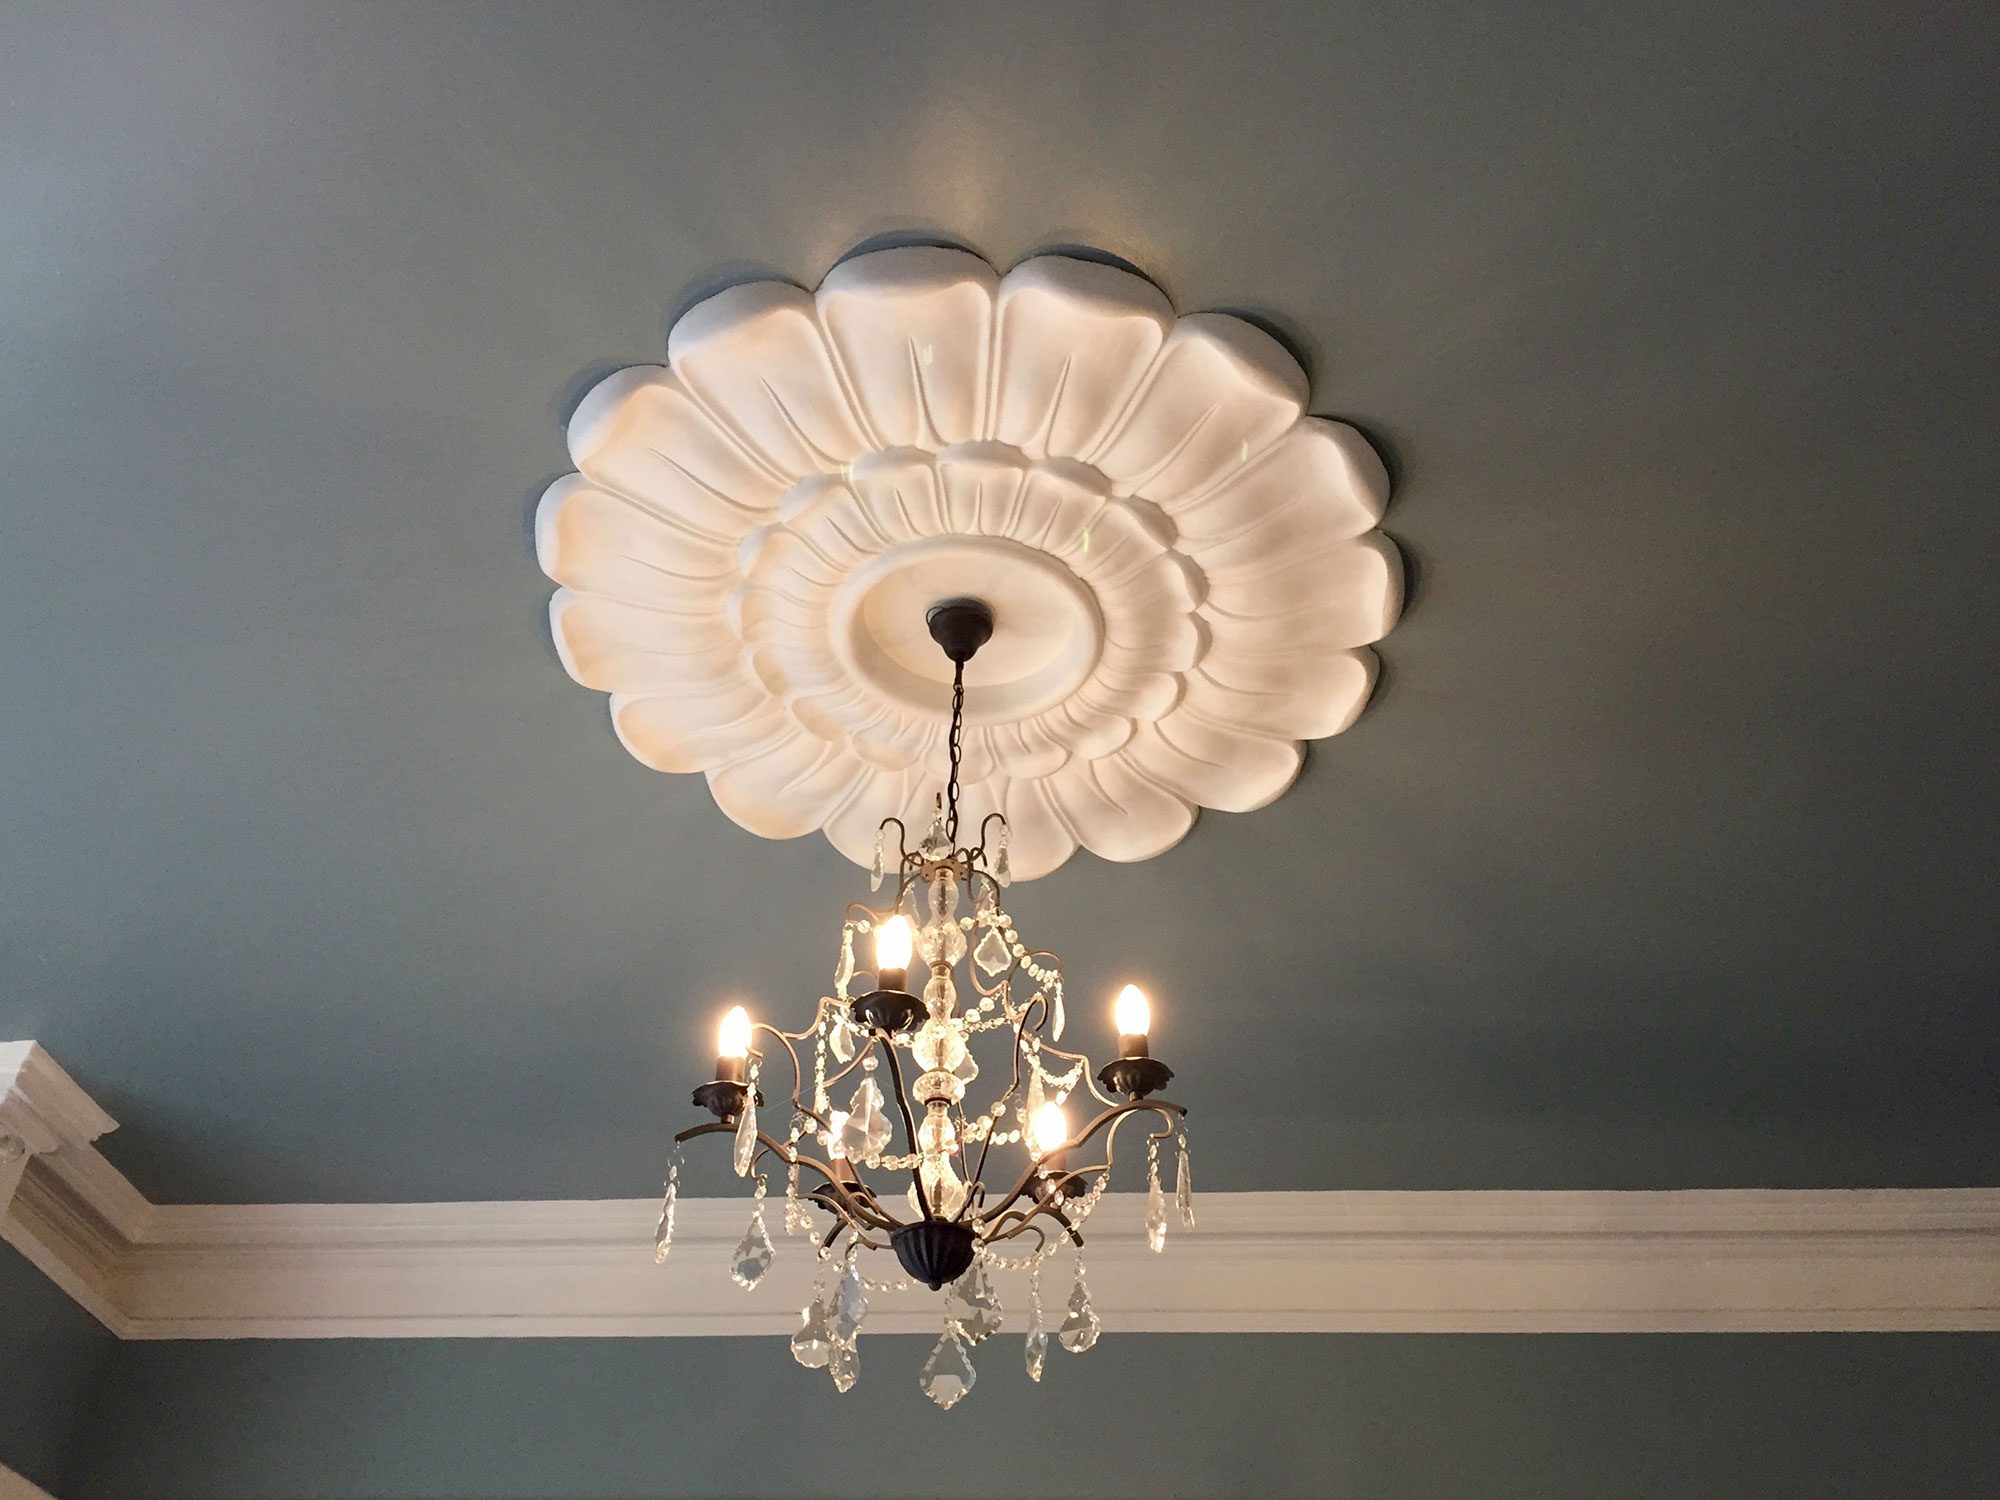 Decorative cornicing by Plaster Ceiling Roses